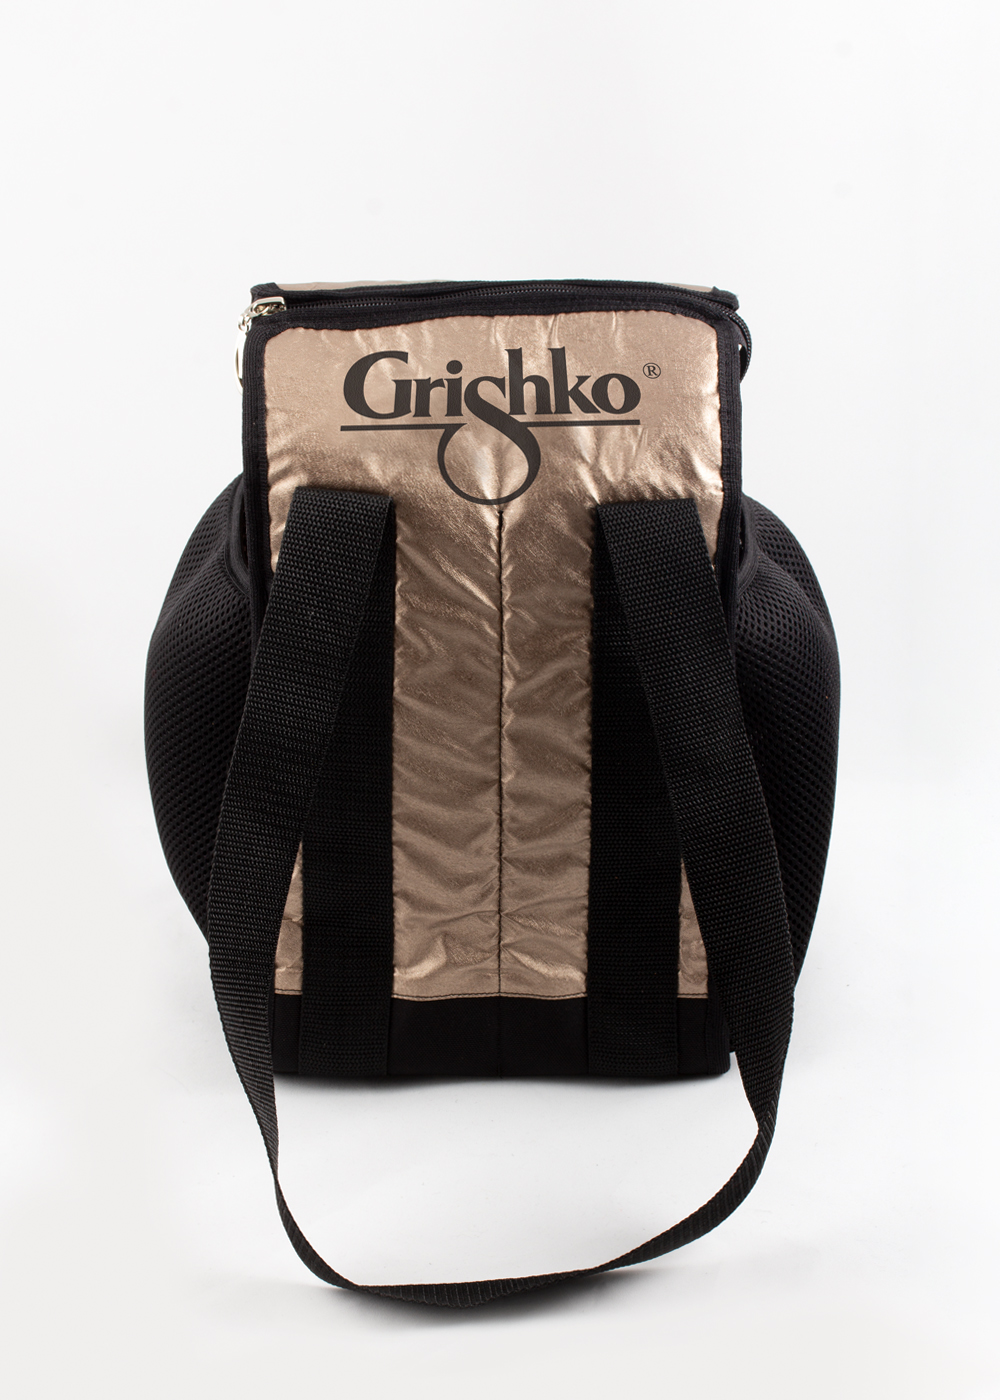 0235/2 4- slot bag with two side pockets (0235/2)  Grishko® Buy online the  best ballet products. Order now!